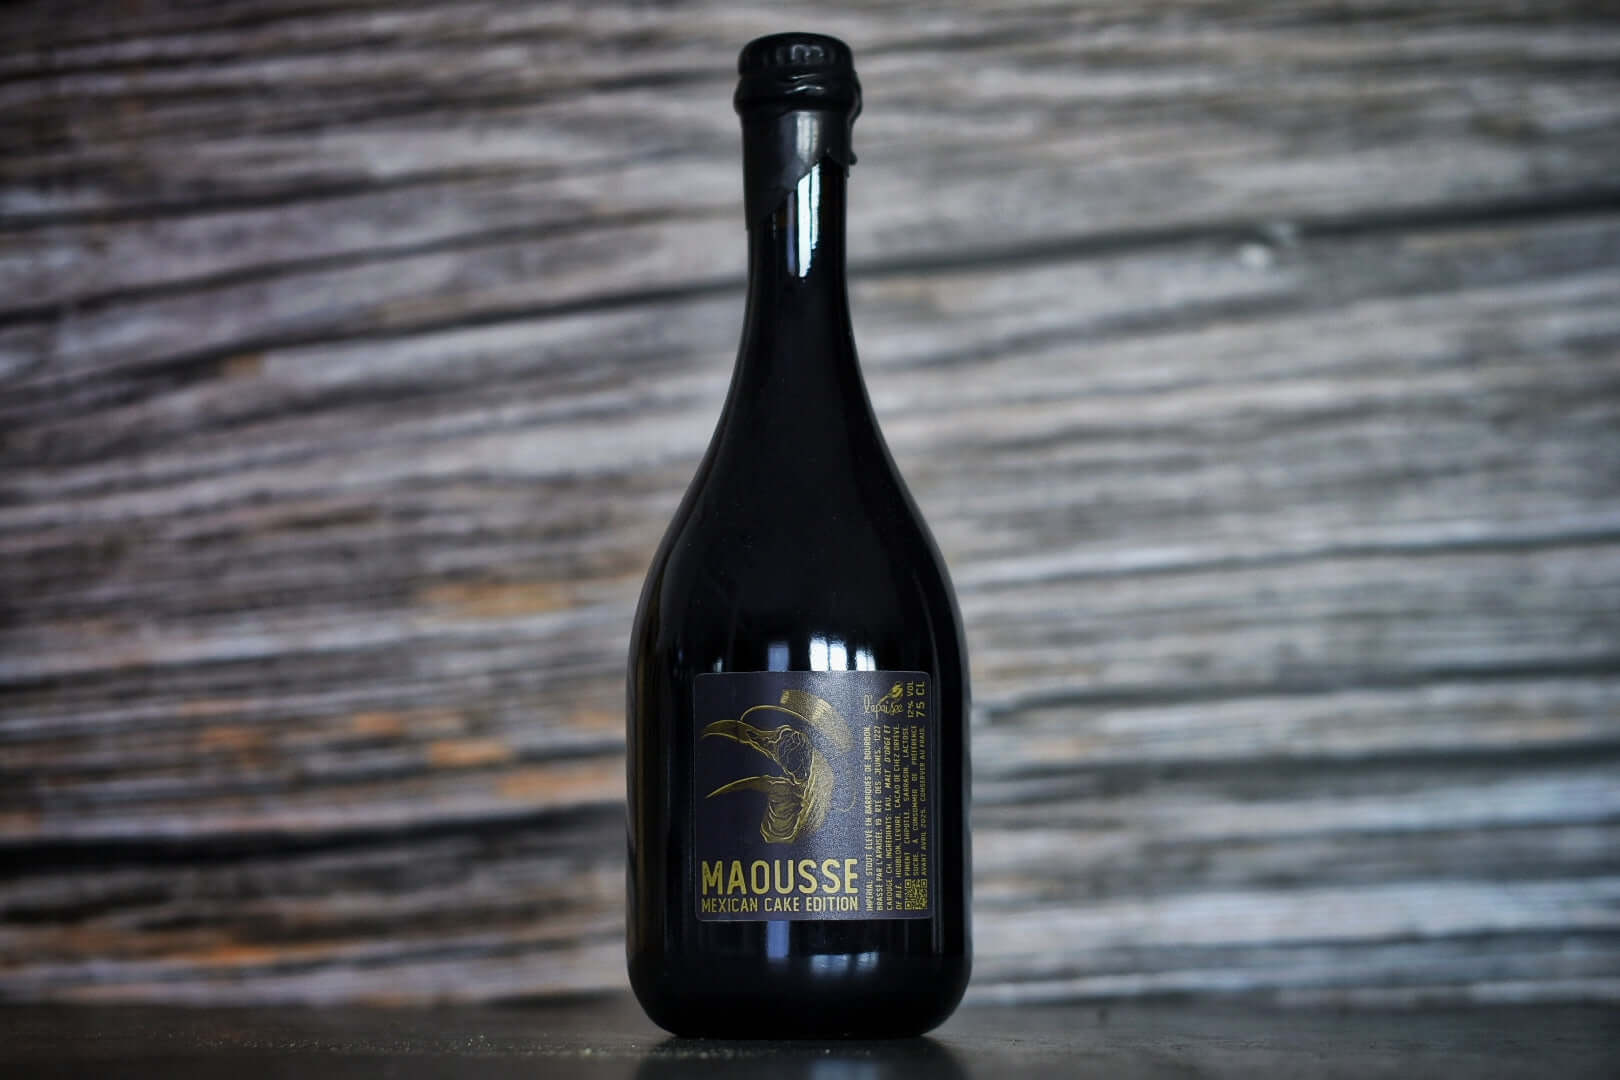 Brasserie L'Apaisée - La Maousse (Mexican Cake Edition) - addicted2craftbeer